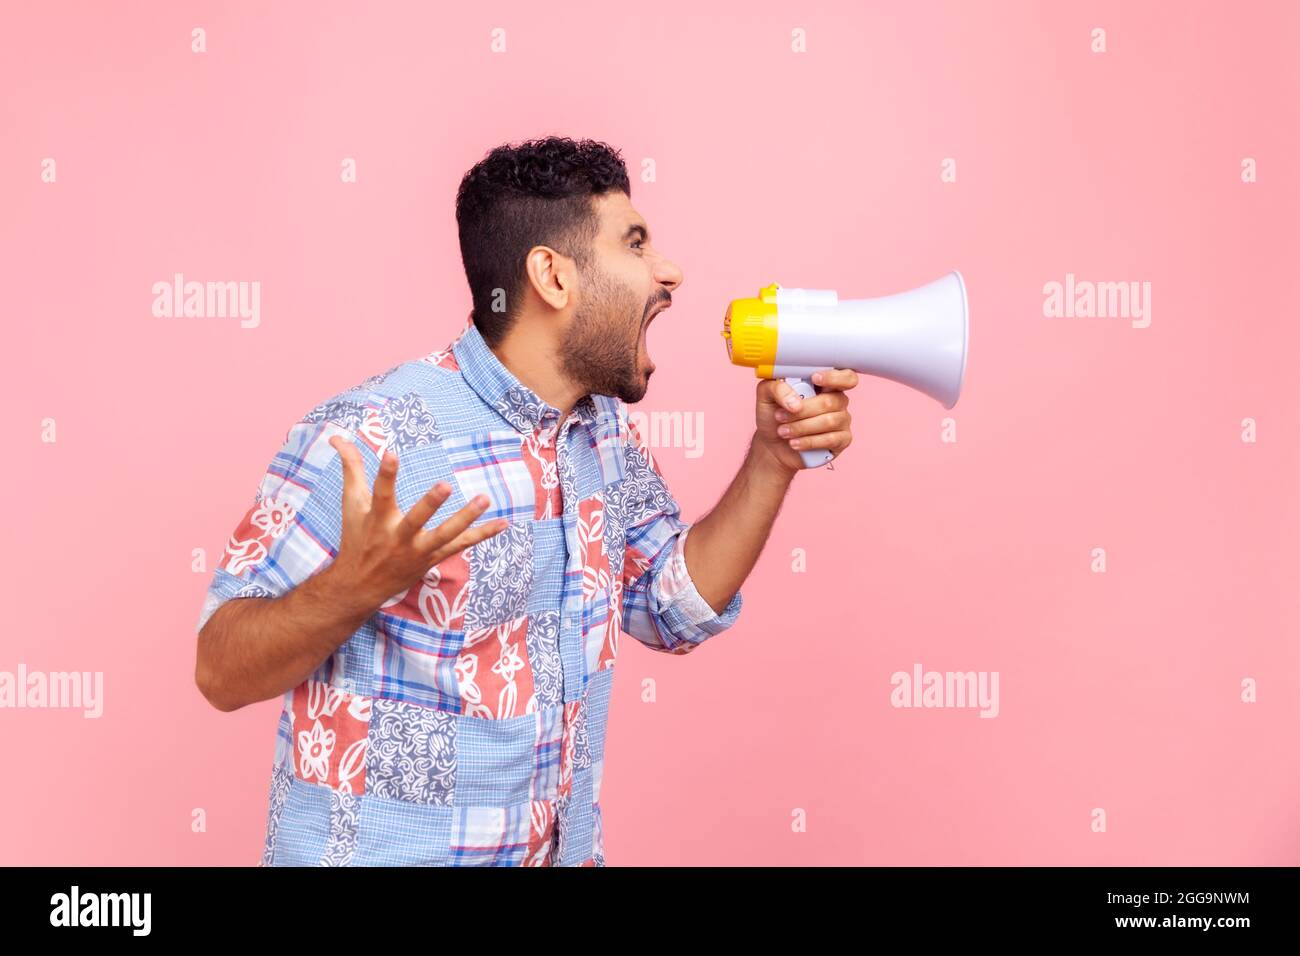 Profile portrait of nervous bearded man in blue casual style shirt loudly speaking screaming holding megaphone, announcing important message. Indoor s Stock Photo